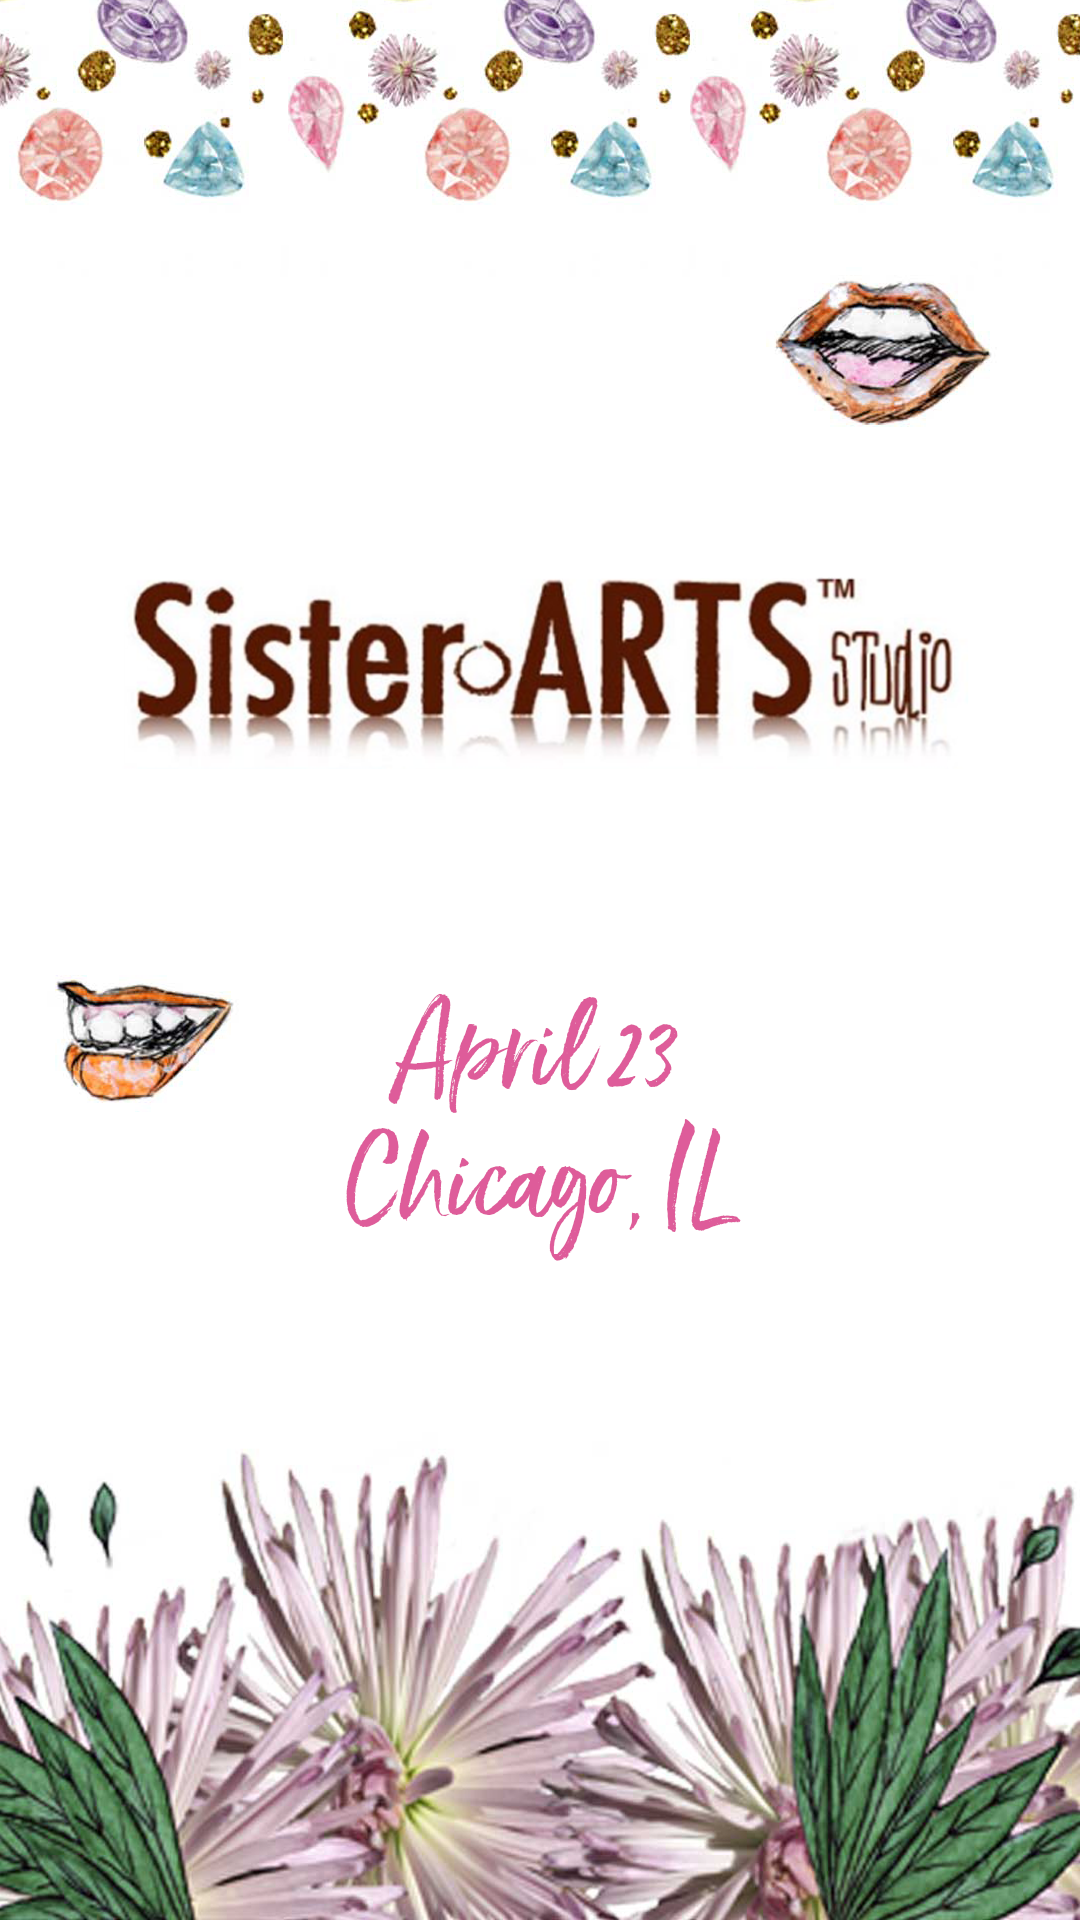 Book Signing at Sister Arts Studio Chicago, IL